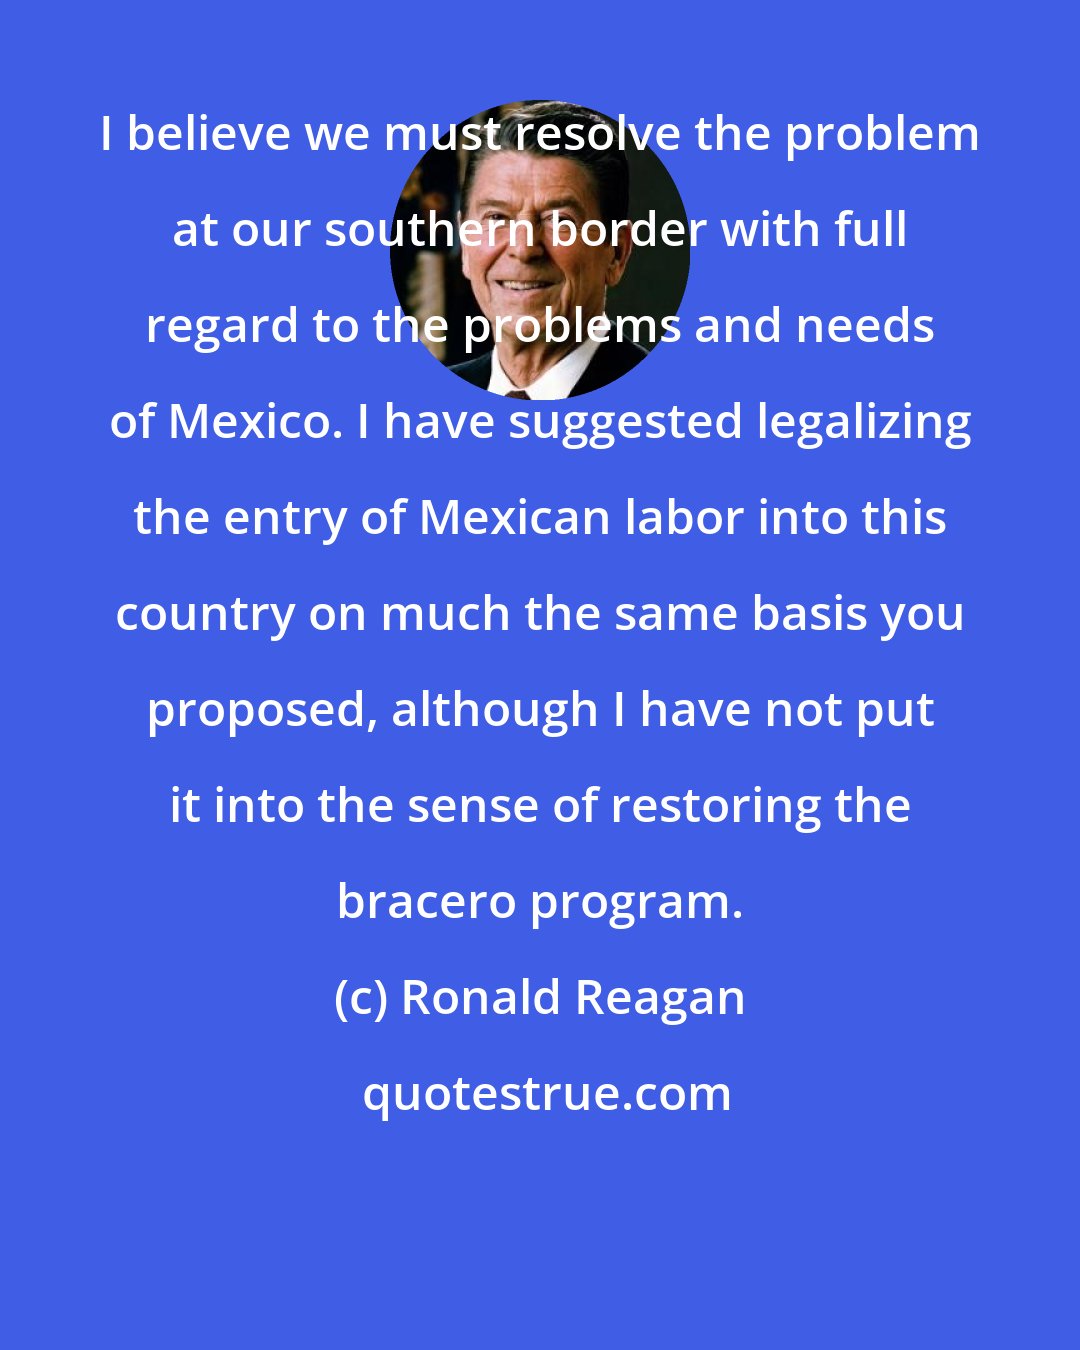 Ronald Reagan: I believe we must resolve the problem at our southern border with full regard to the problems and needs of Mexico. I have suggested legalizing the entry of Mexican labor into this country on much the same basis you proposed, although I have not put it into the sense of restoring the bracero program.